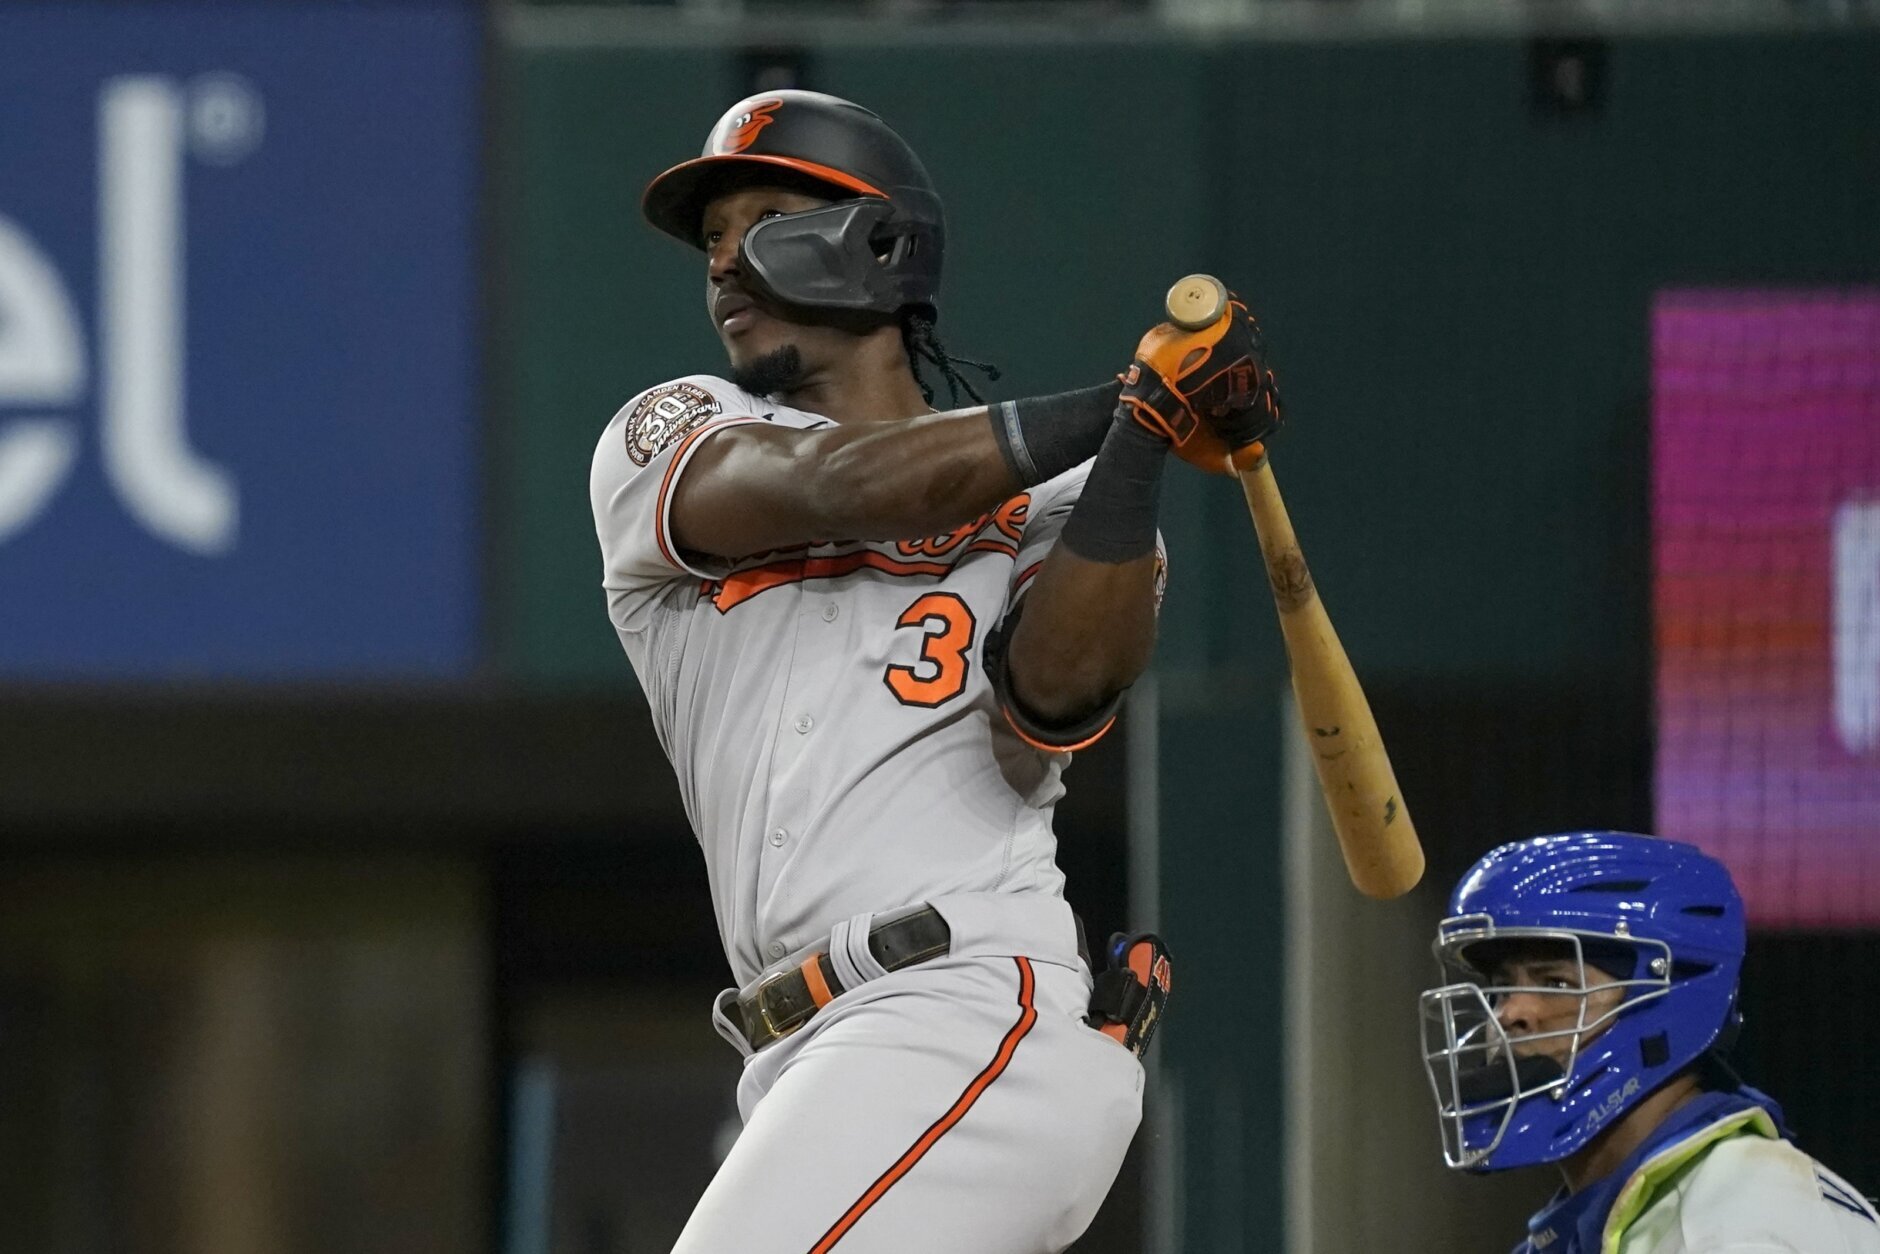 Jorge Mateo getting center field reps for Orioles